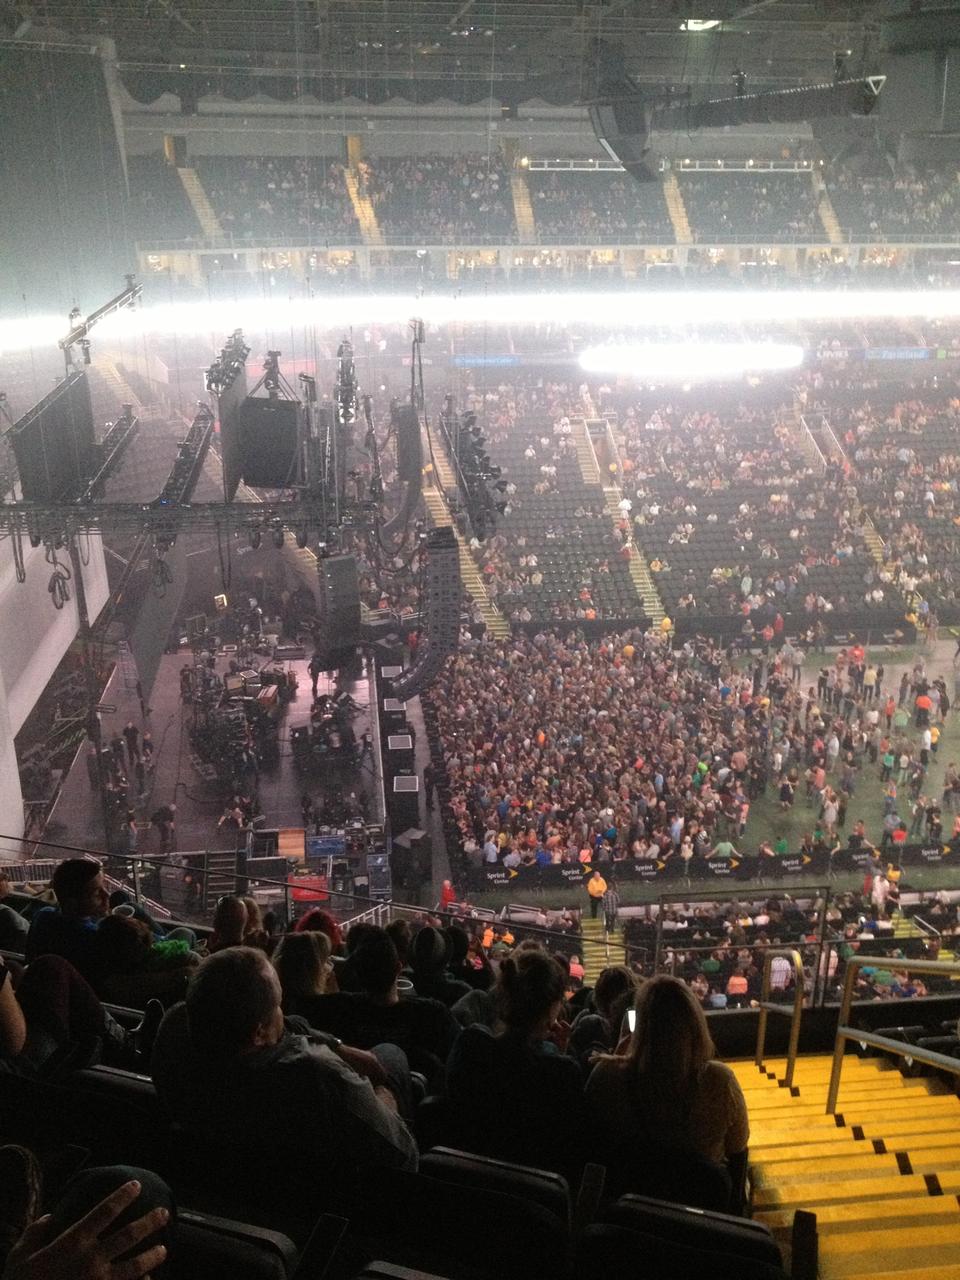 section 211, row 8 seat view  for concert - t-mobile center